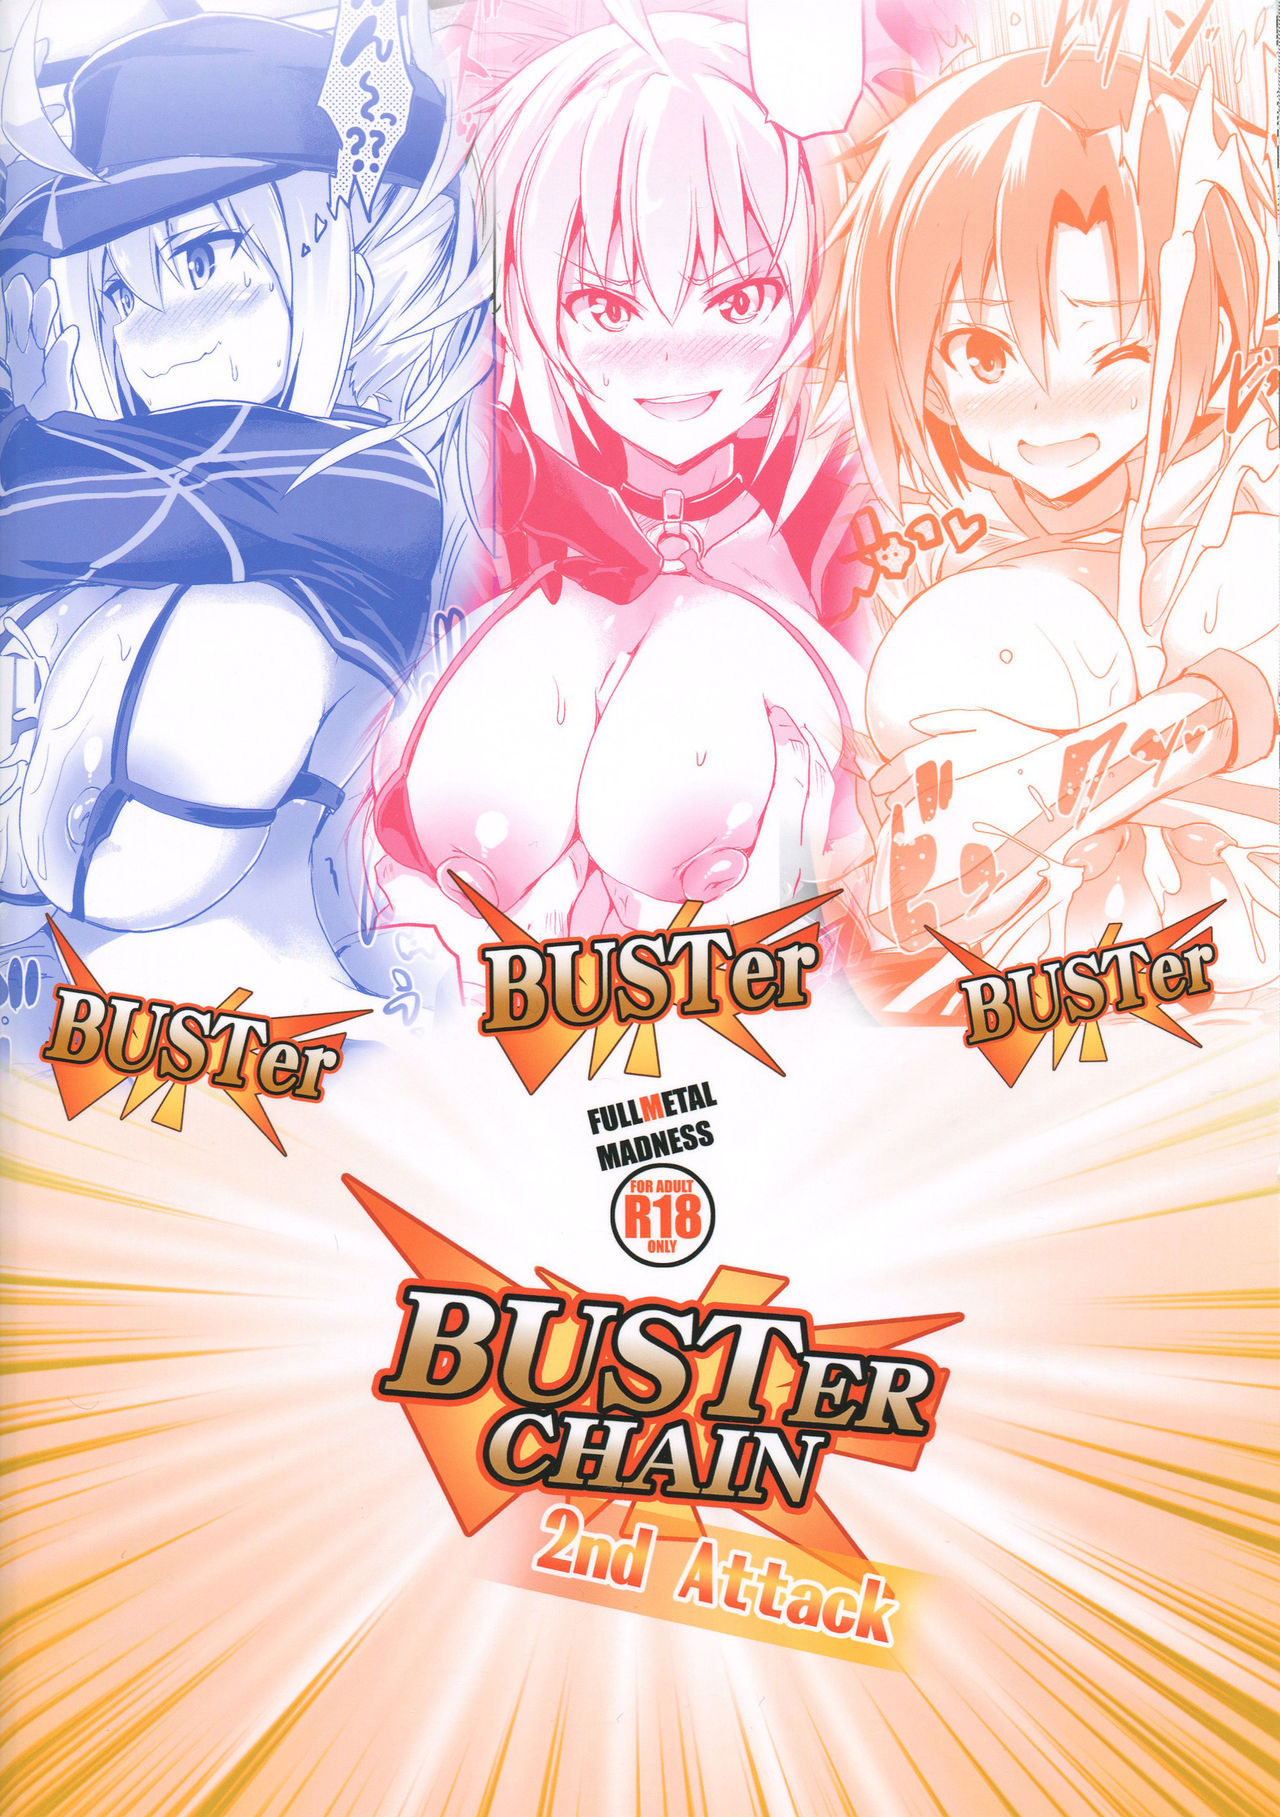 (C96) [FULLMETAL MADNESS (旭)] BUSTER CHAIN 2nd Attack (Fate/Grand Order)